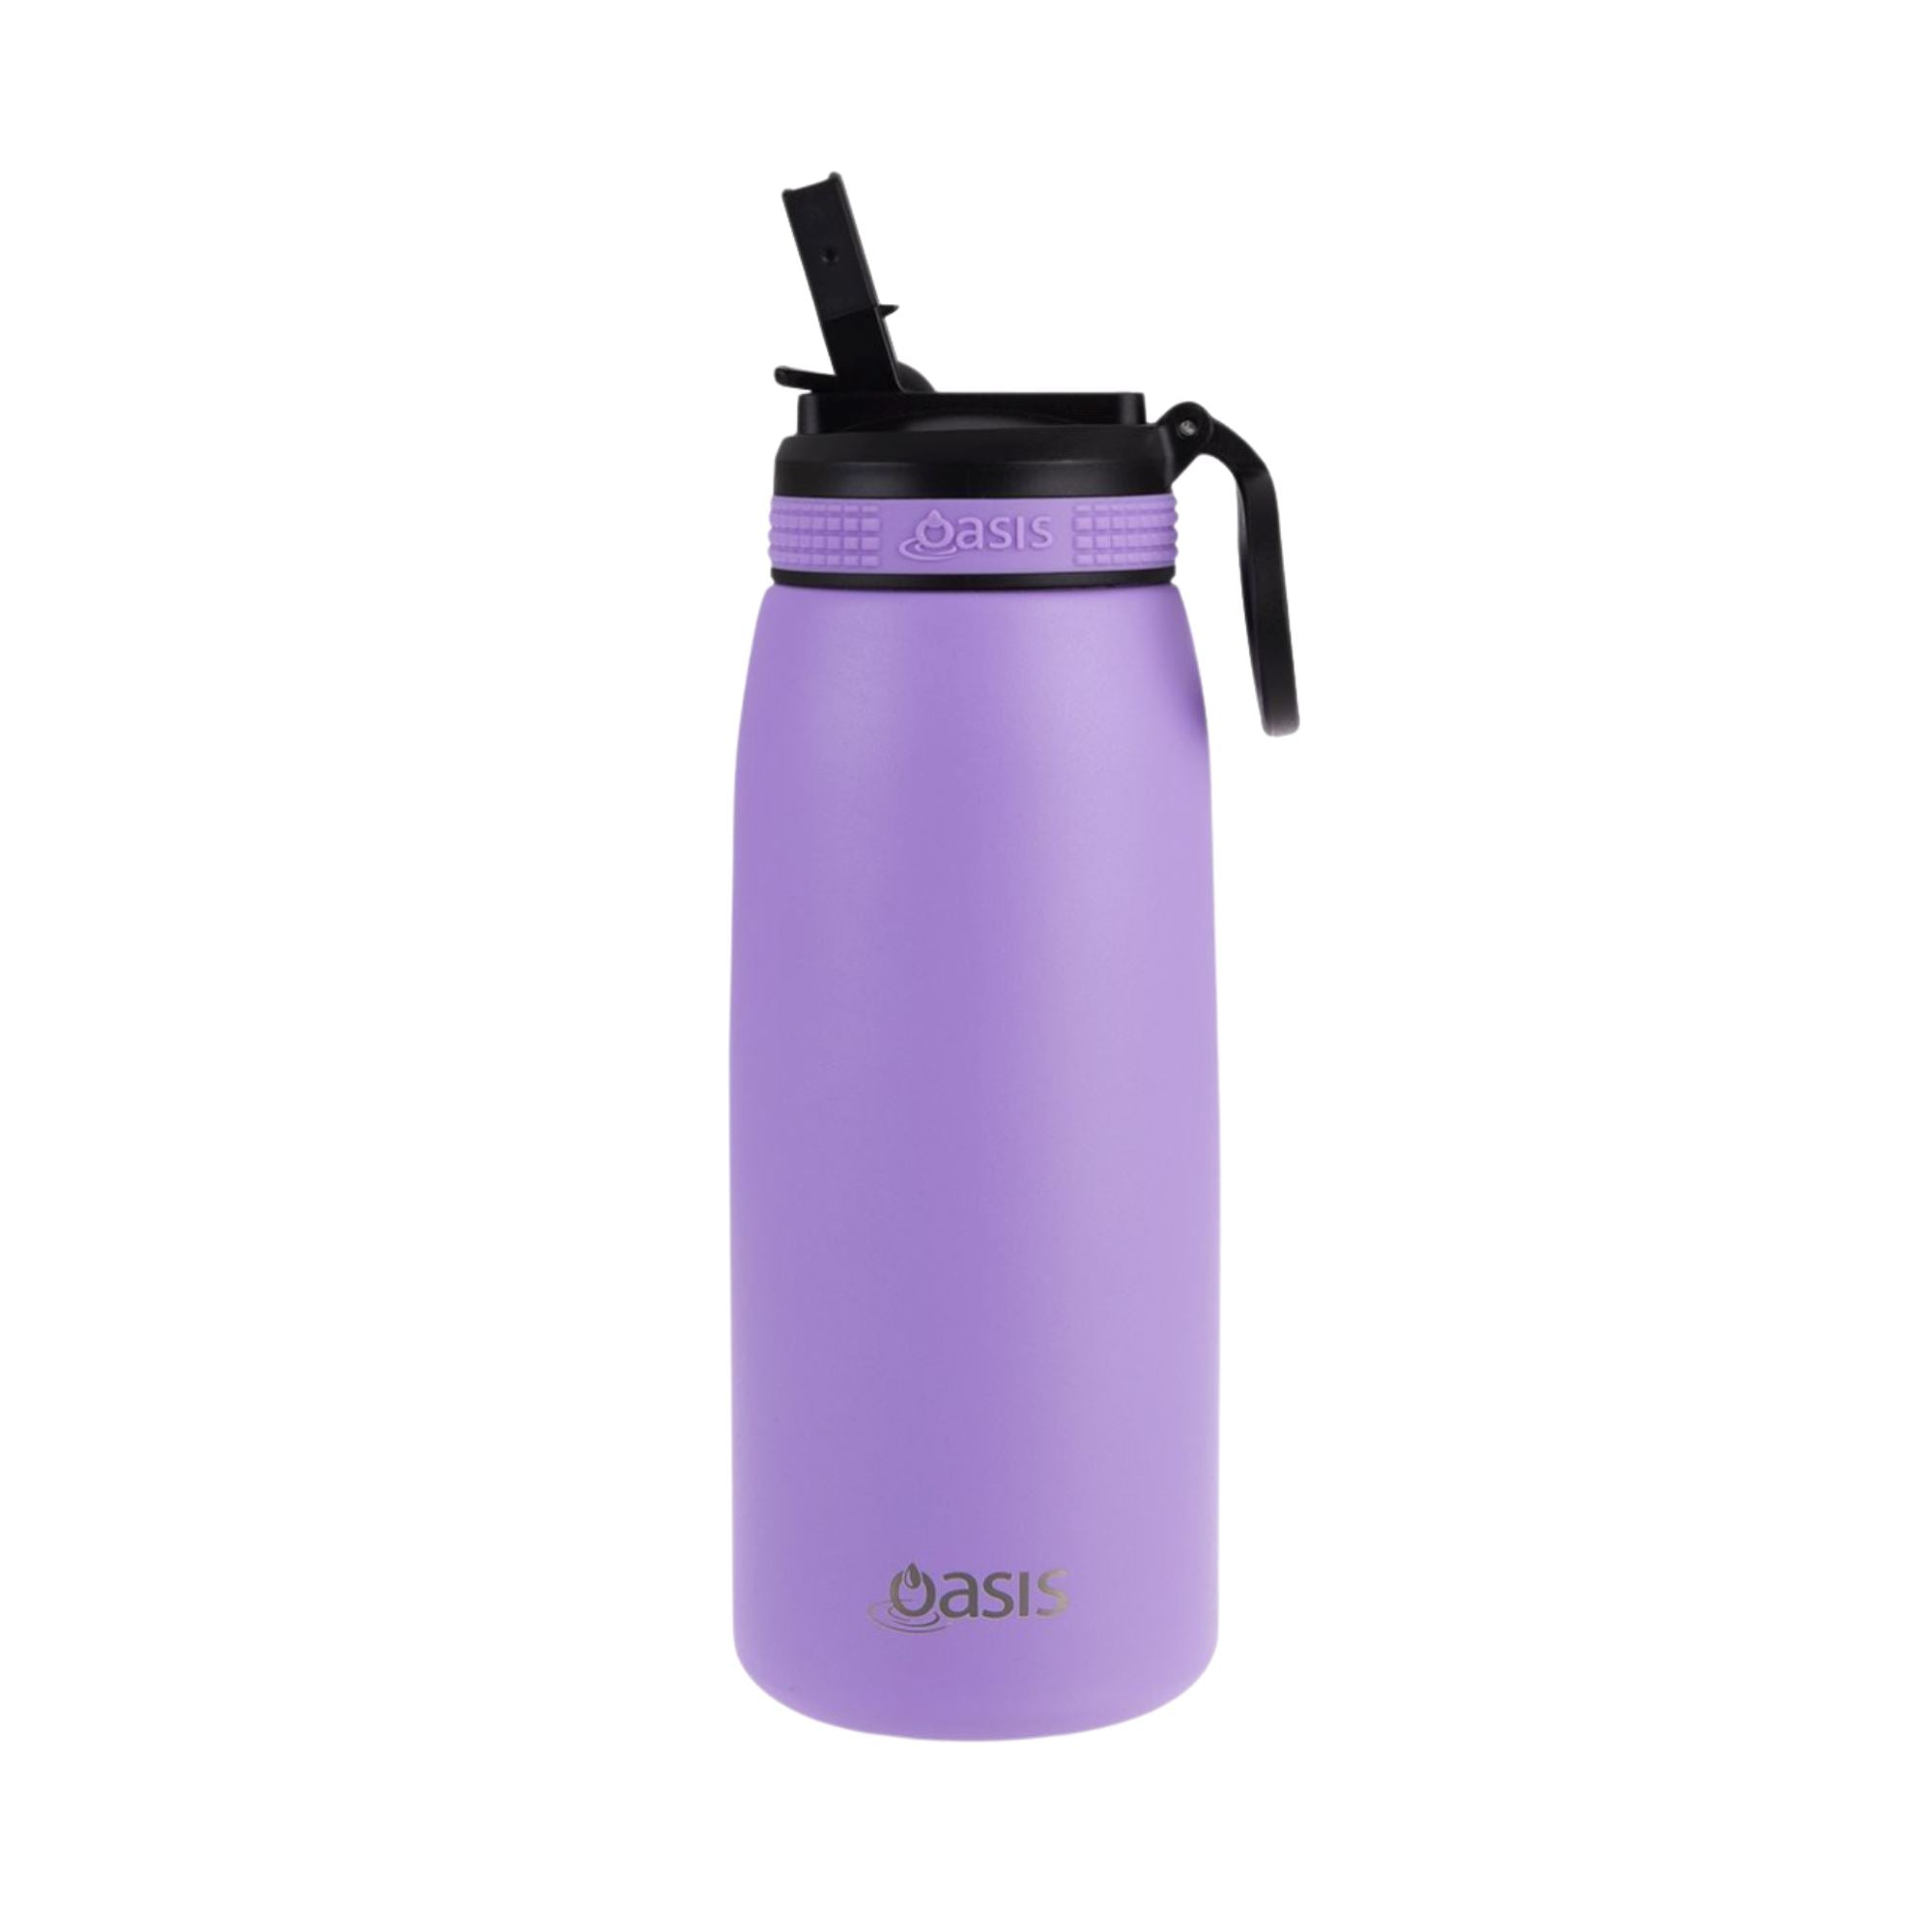 Oasis Insulated Sports Bottle With Sipper 780ml - Lavender Purple Water Bottles Oasis 